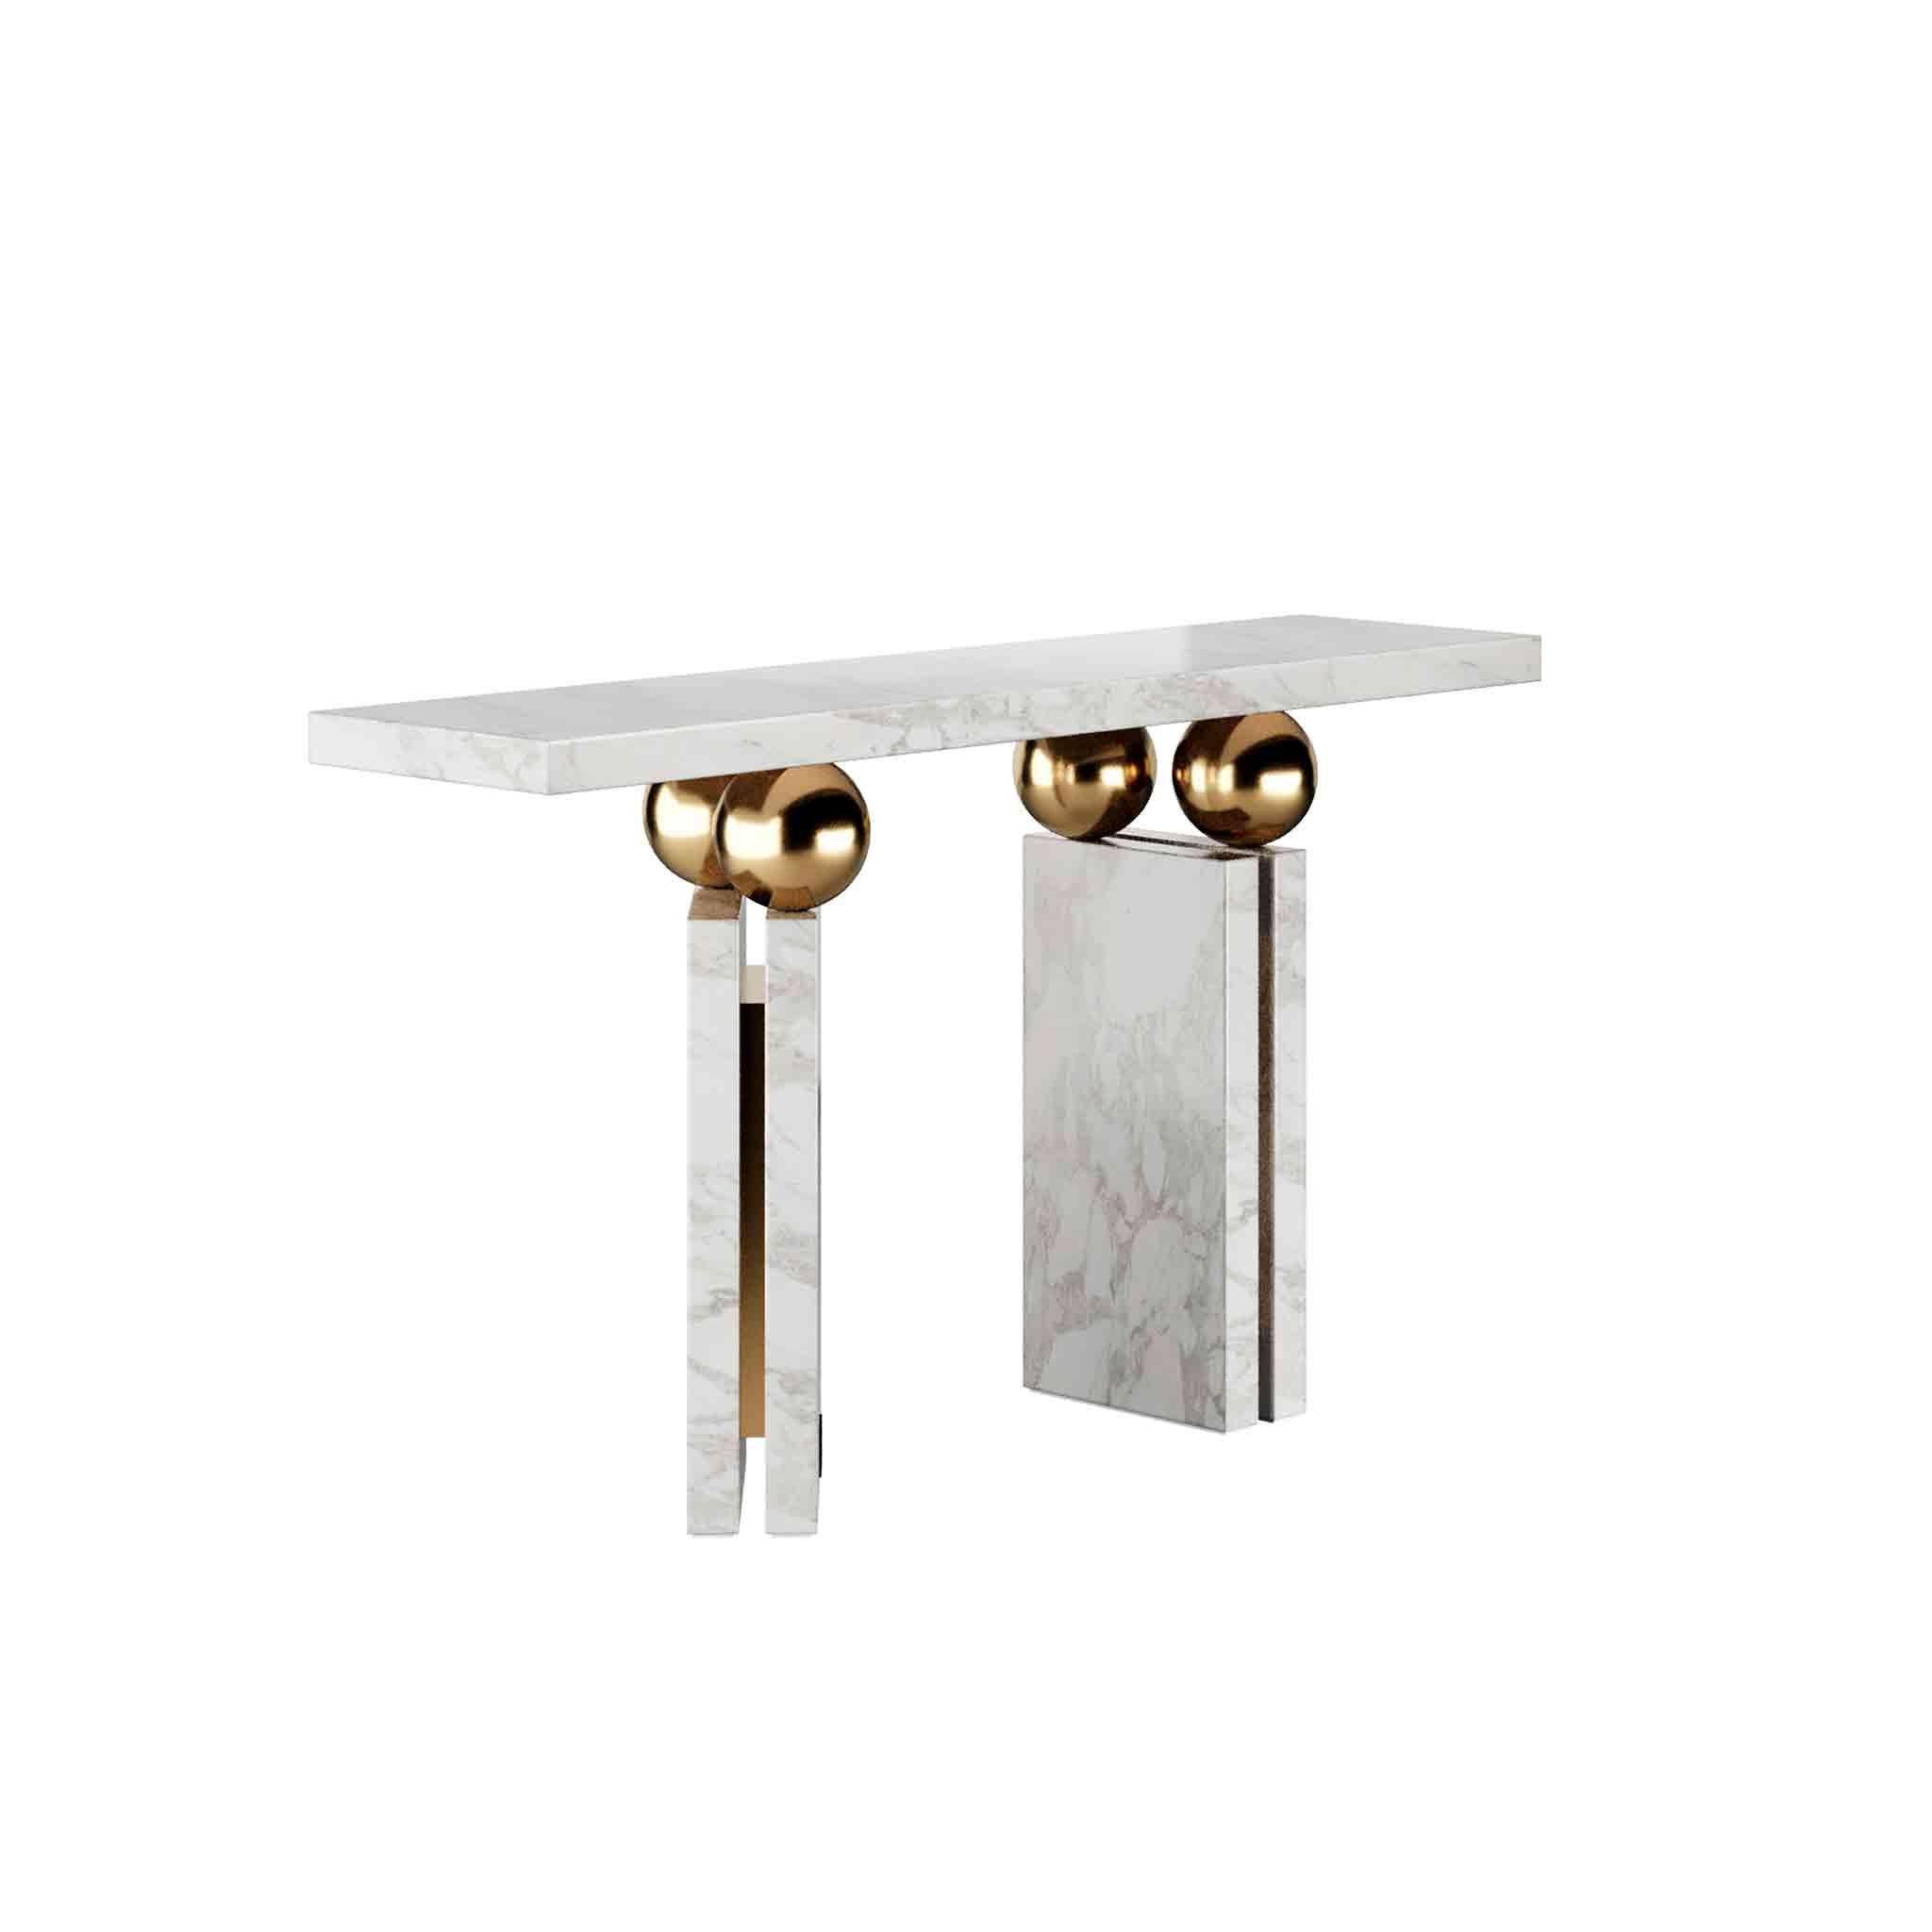 Portuguese Modern Brutalist Console Table with White Marble & Polished Brass Details For Sale